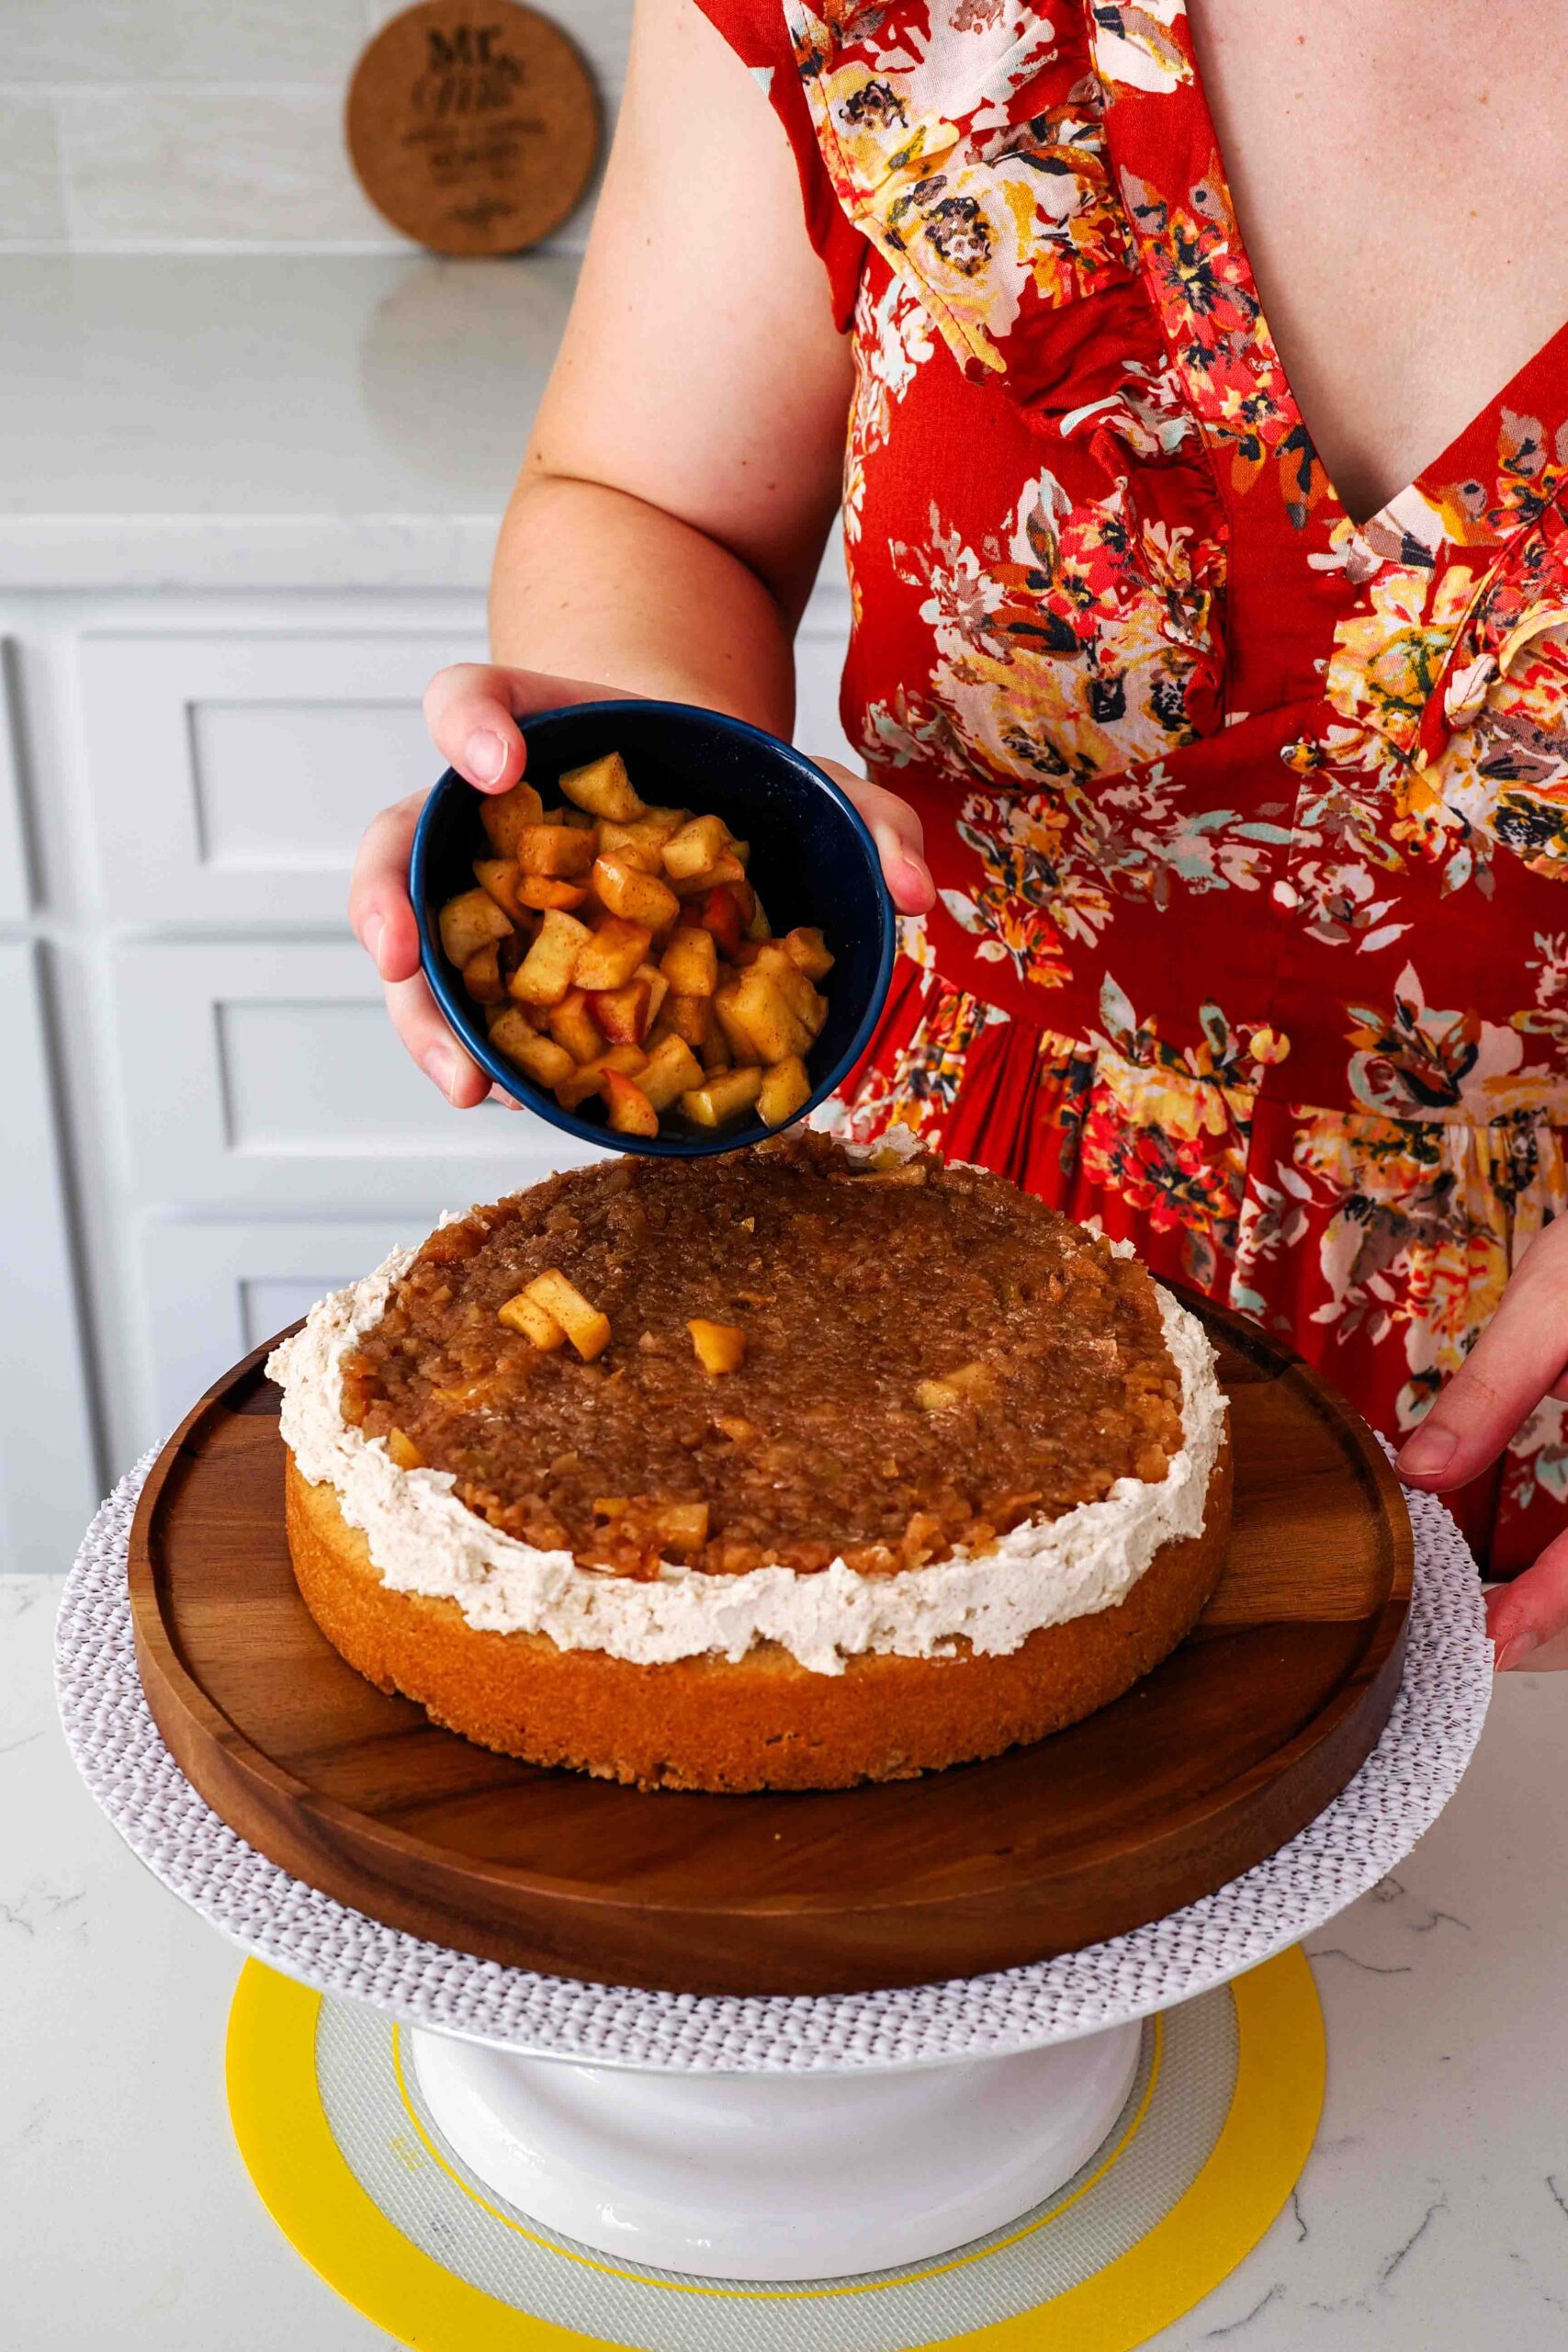 A woman sprinkles cooked apple pieces on top of a spiced apple cake filling.